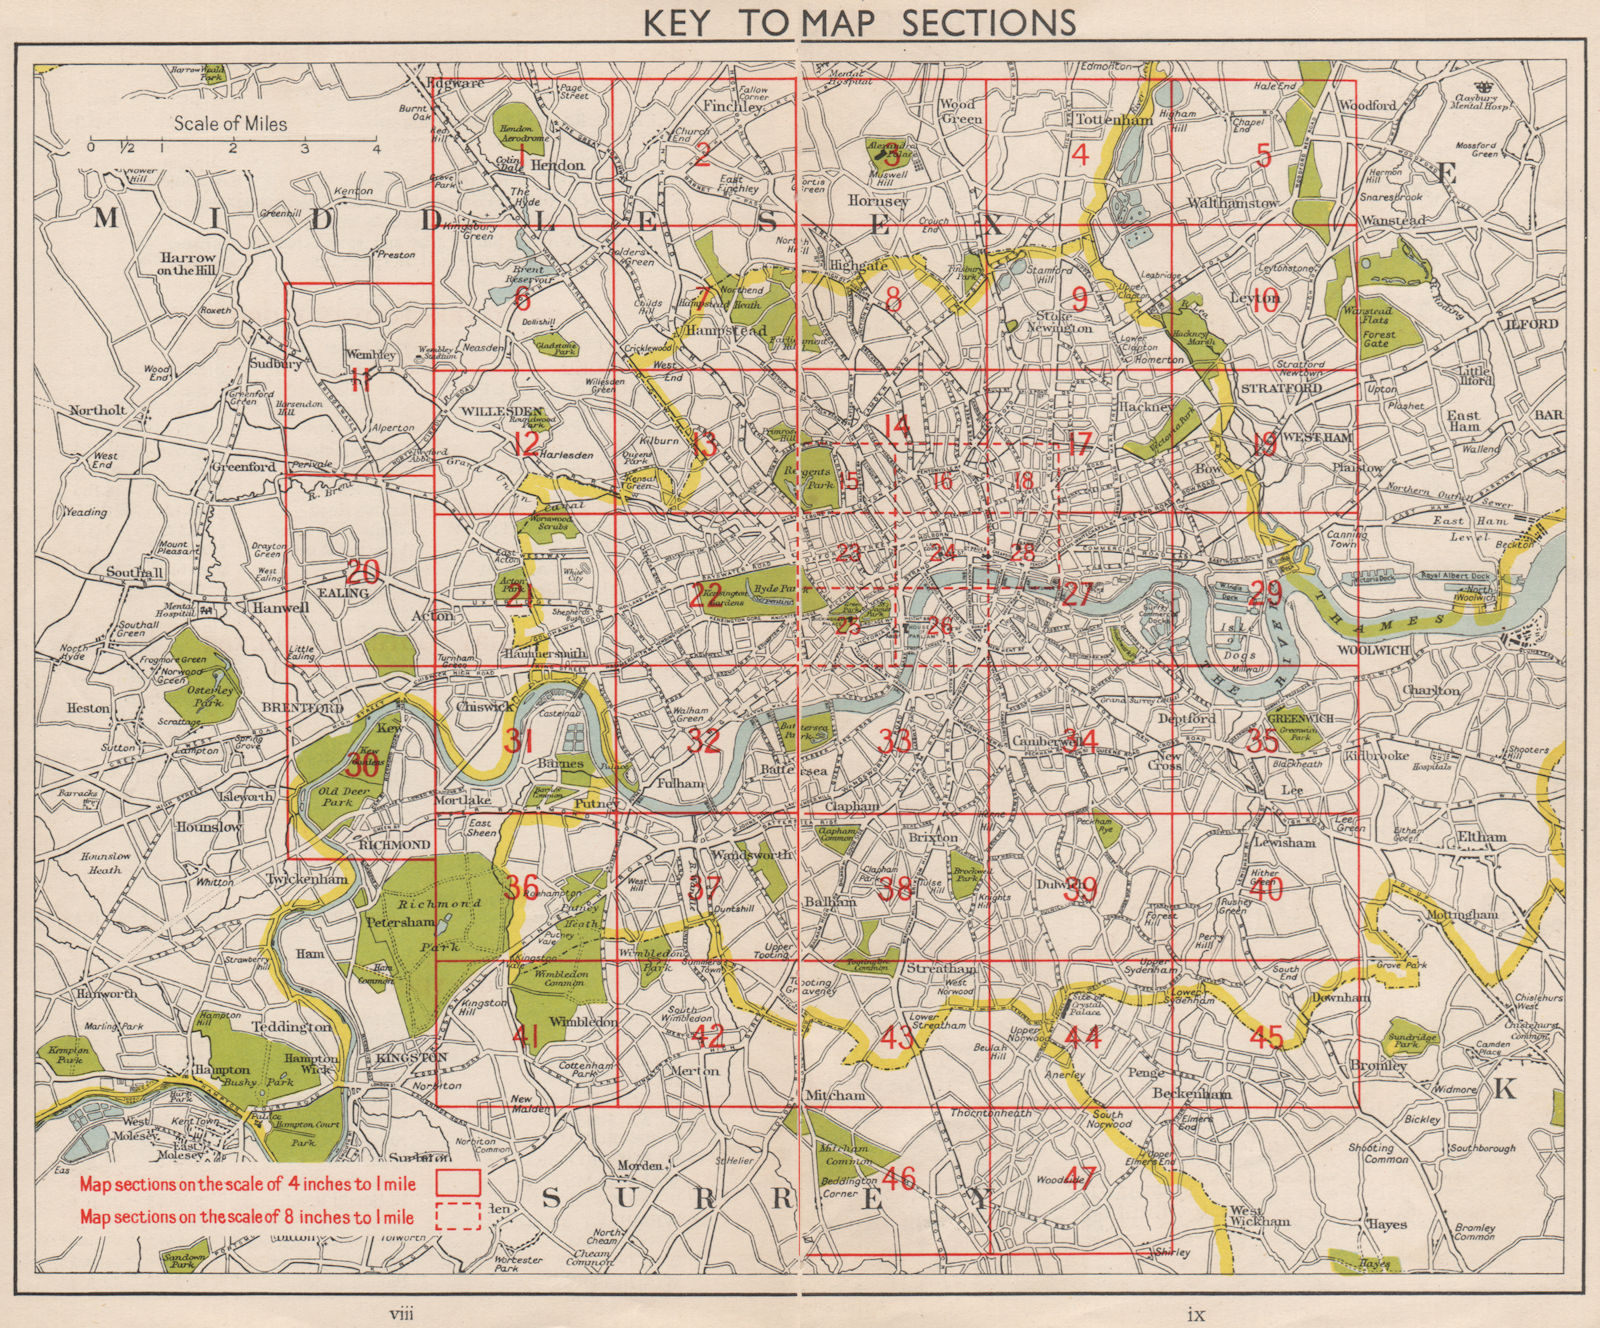 Associate Product LONDON. Index map. Roads. BACON 1959 old vintage plan chart